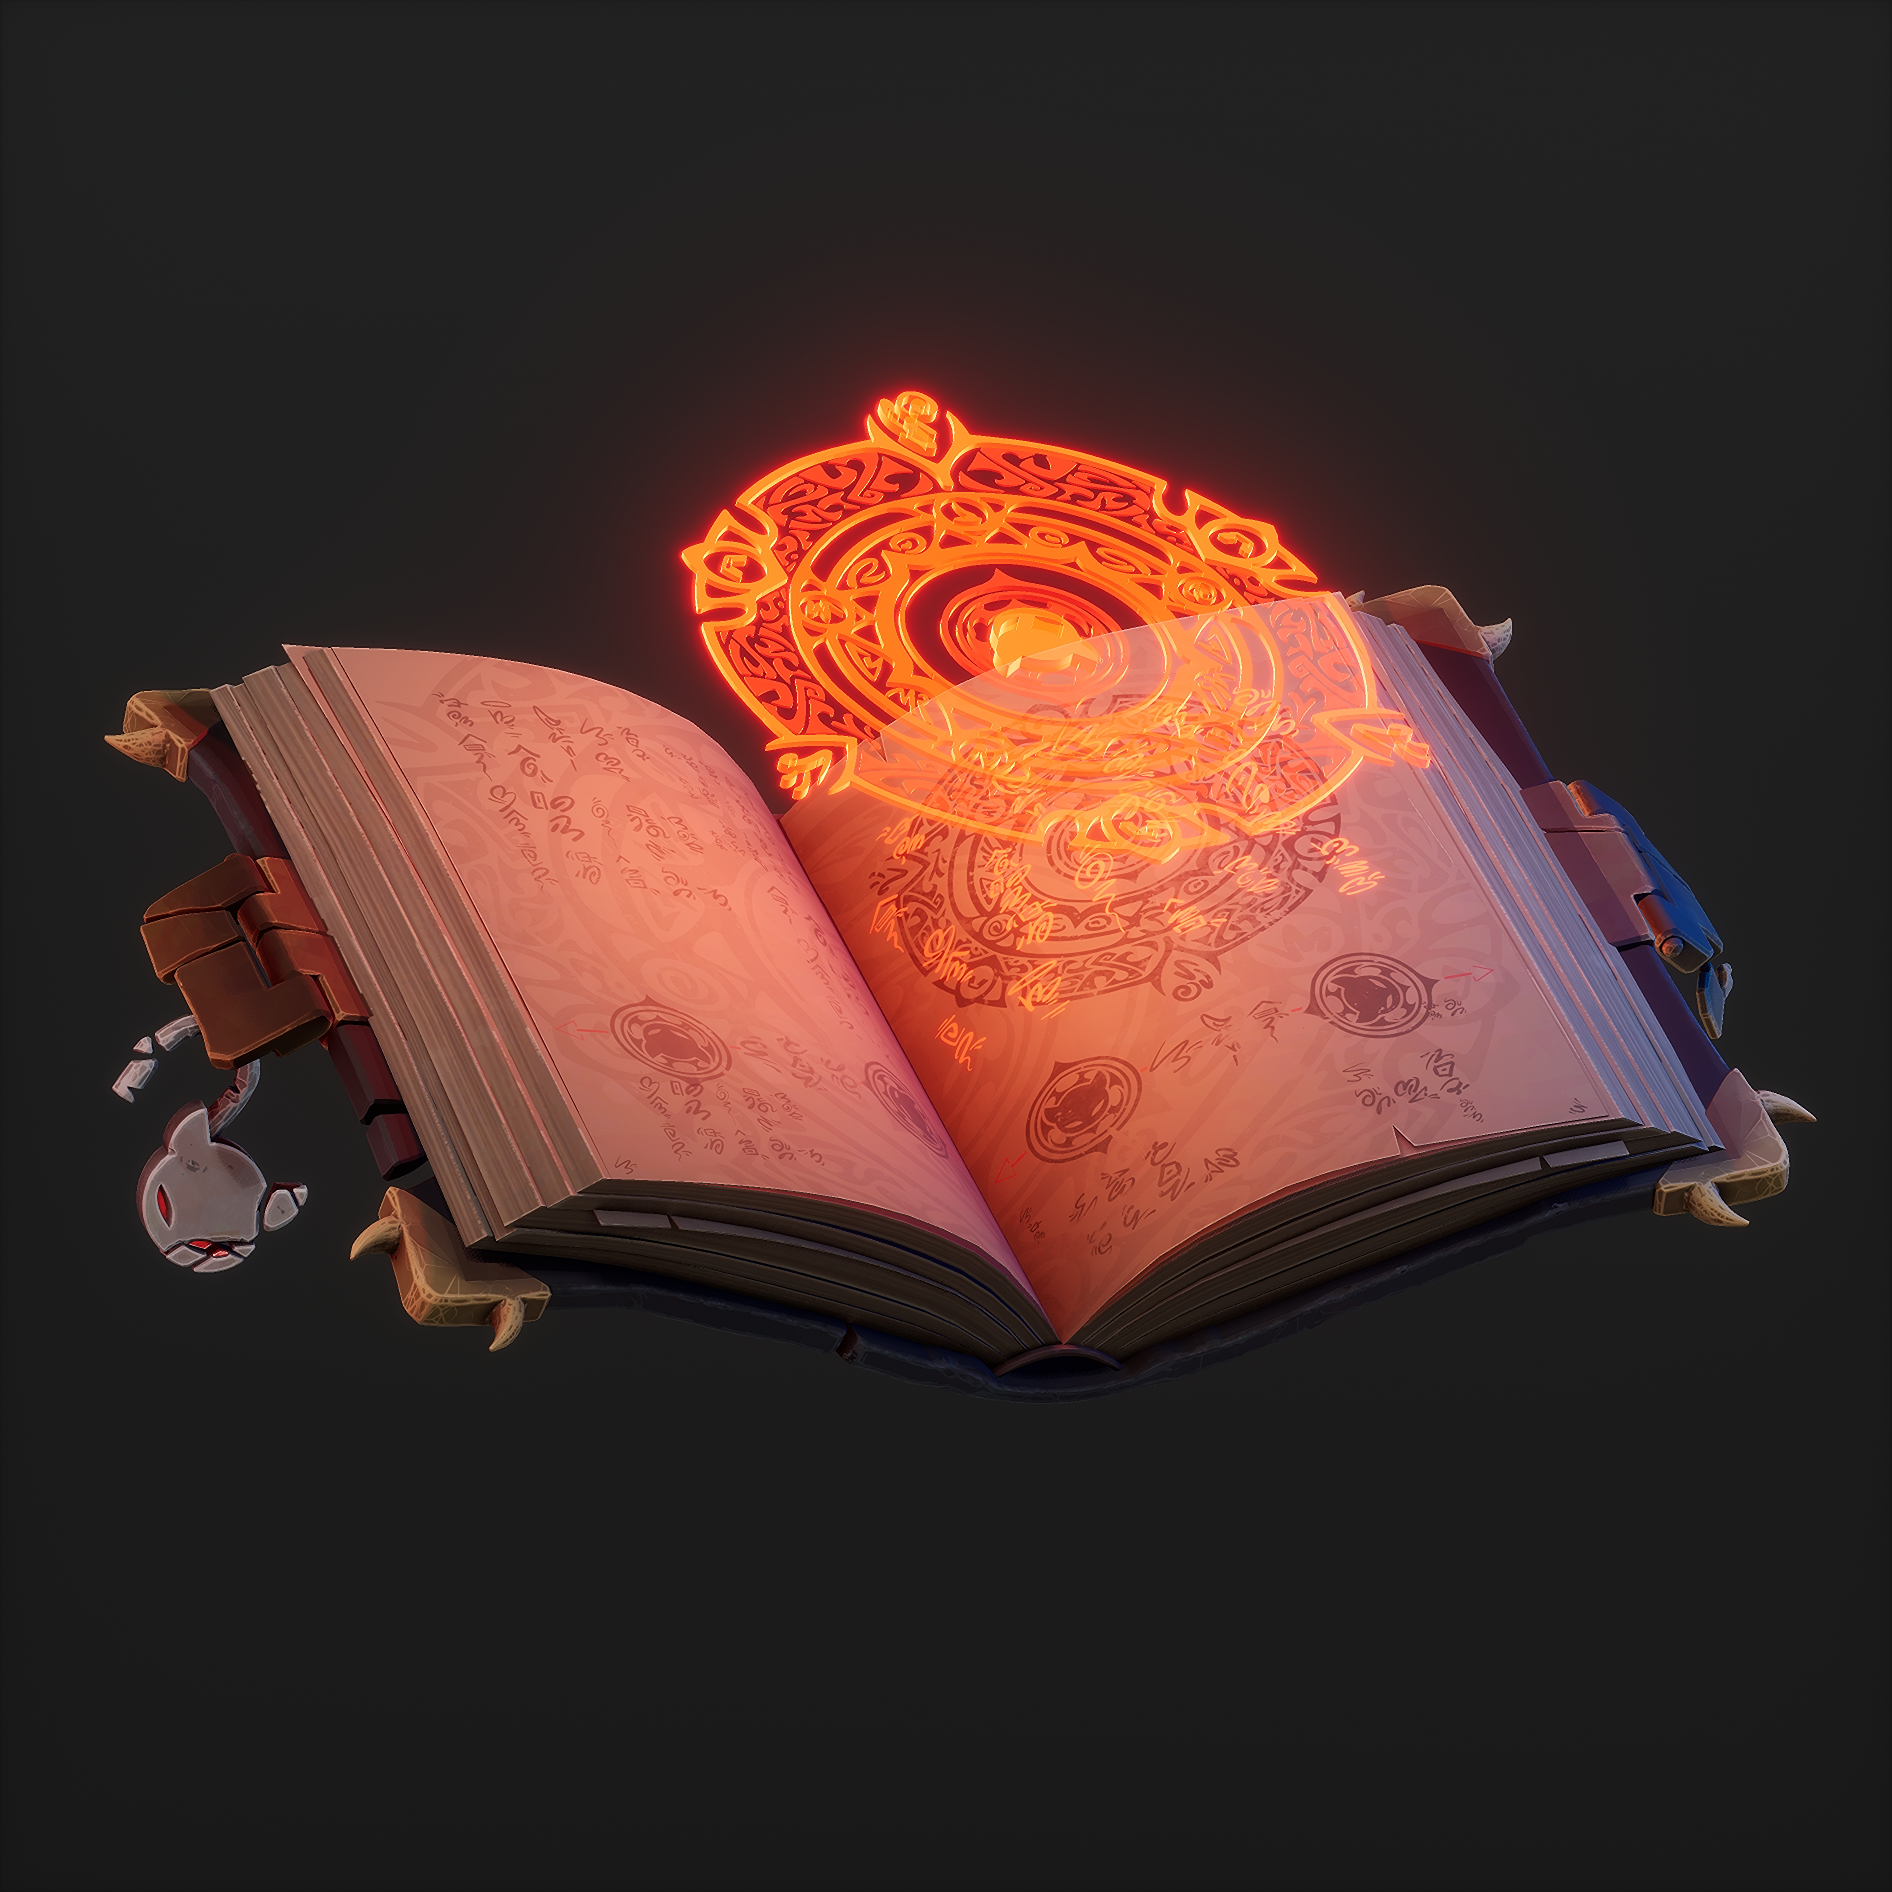 Dovah's book, used to summon The Little Devils